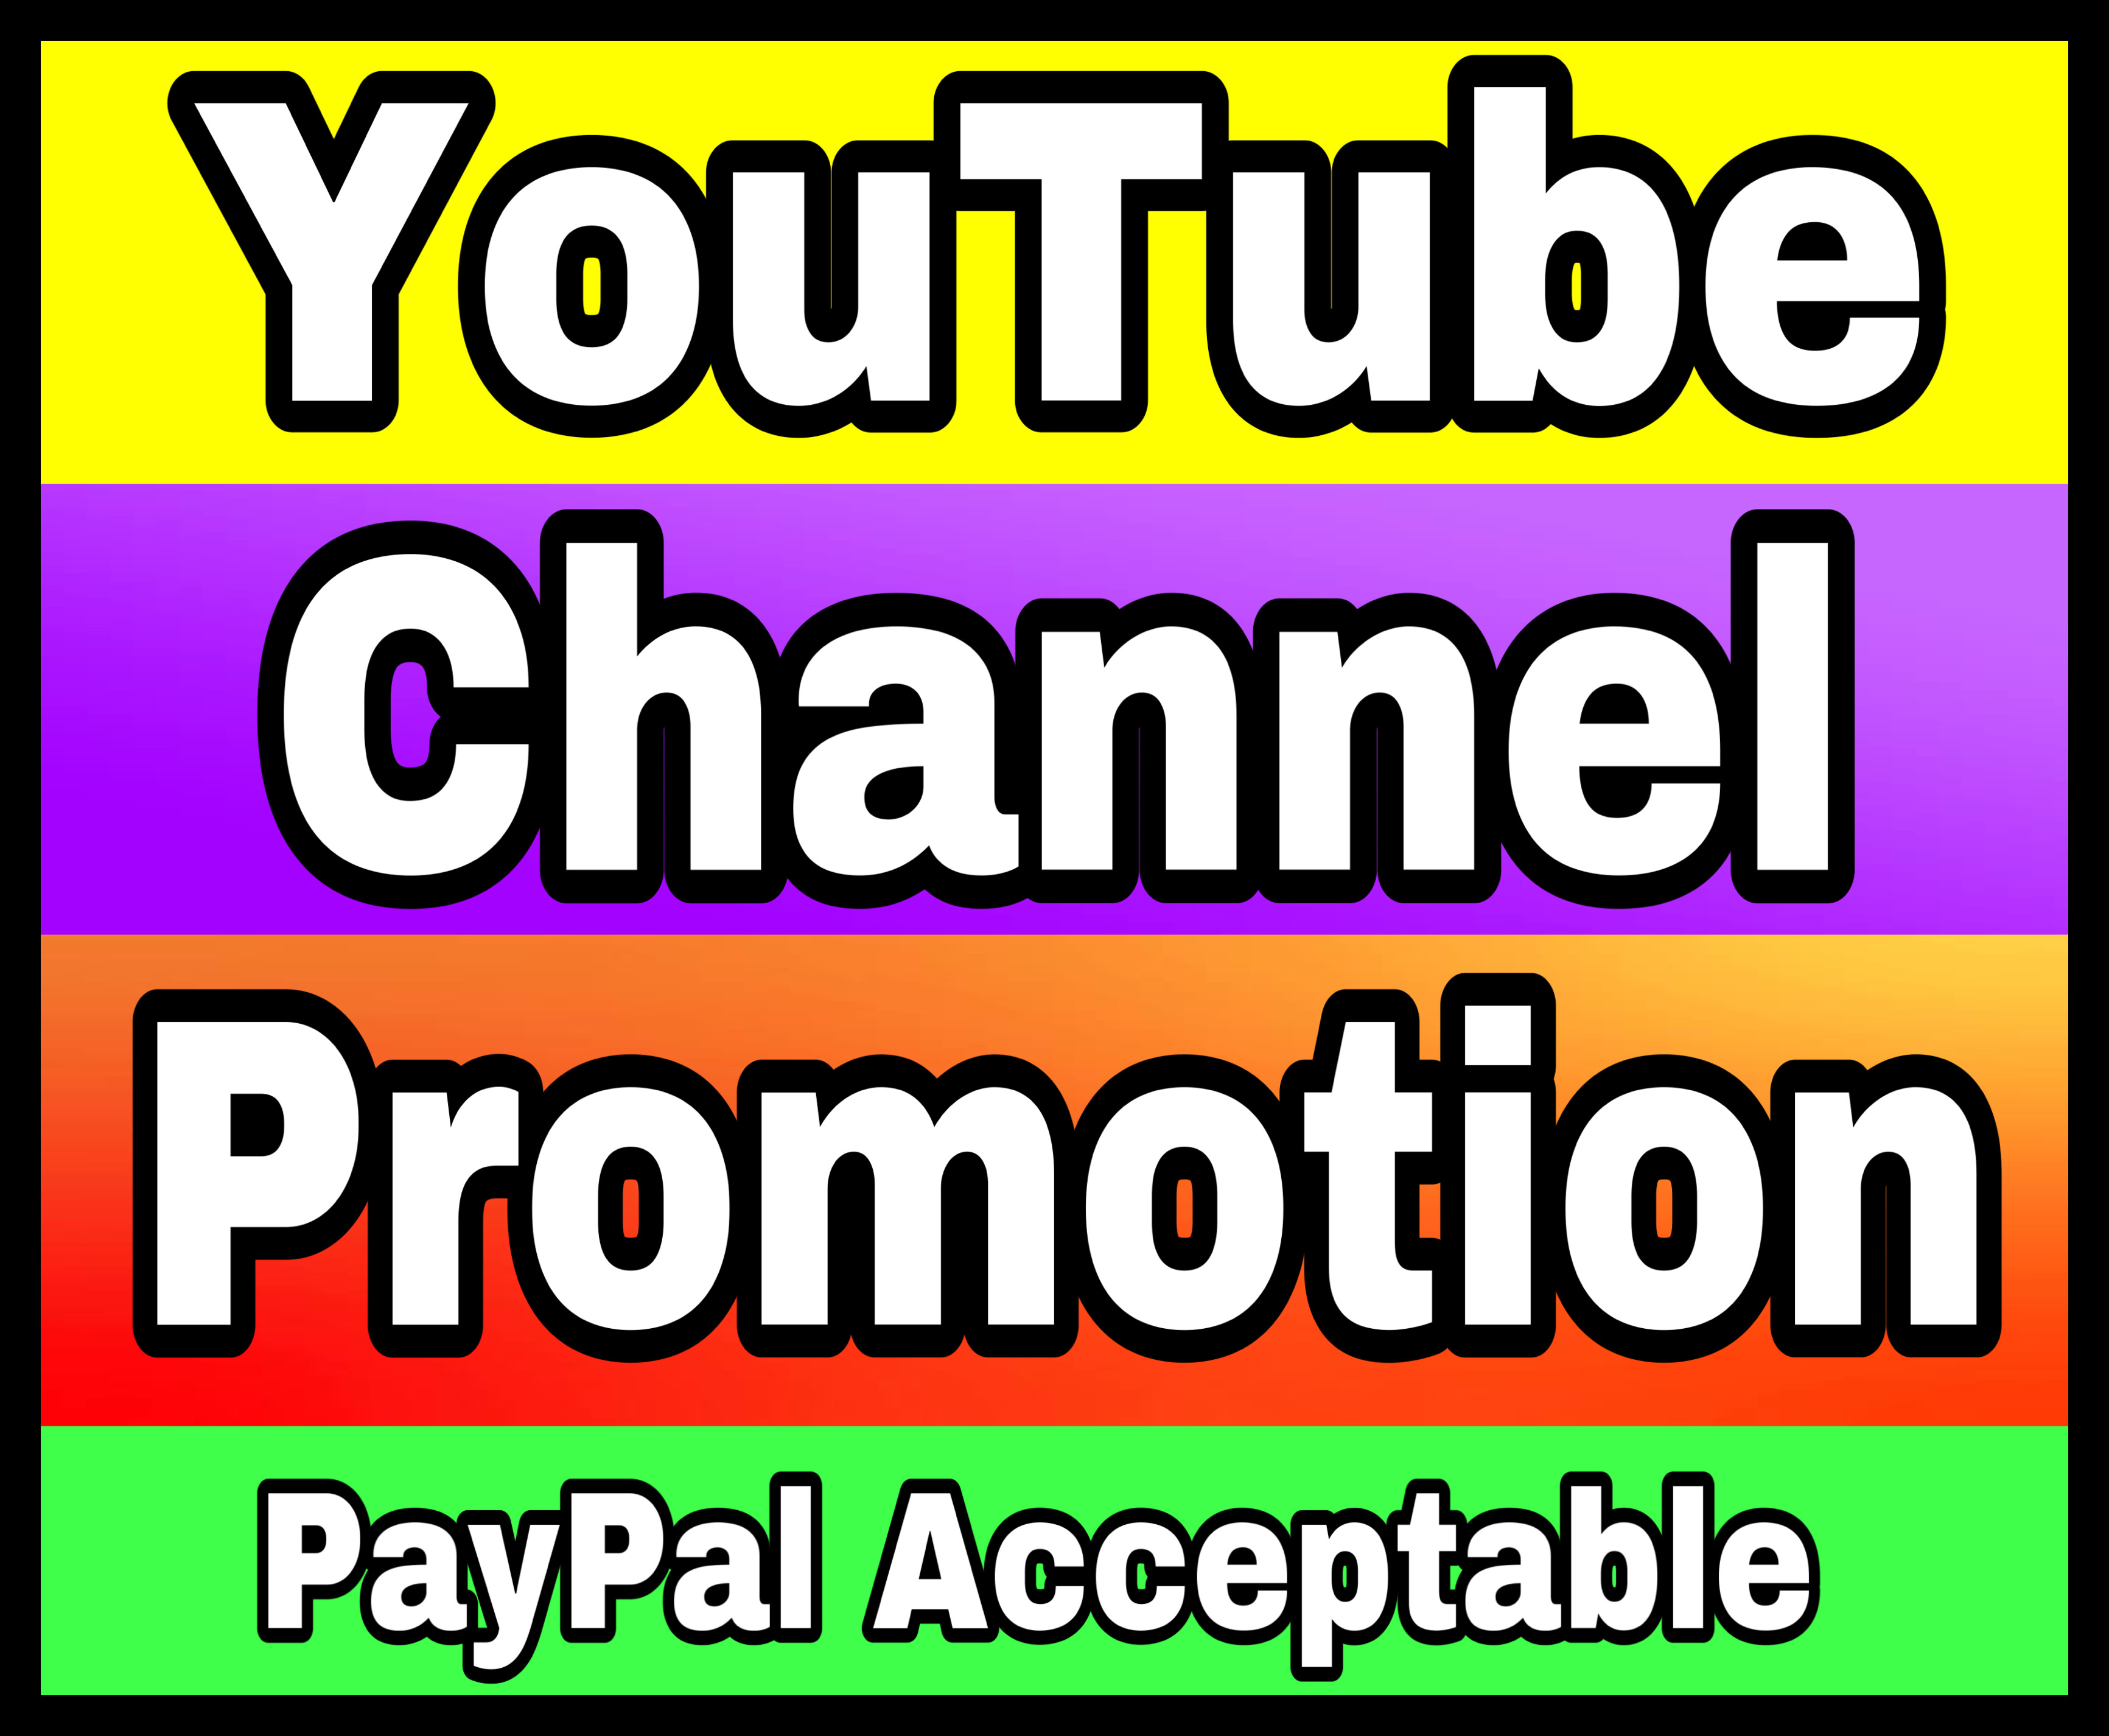 YouTube real, organic & high quality promotion